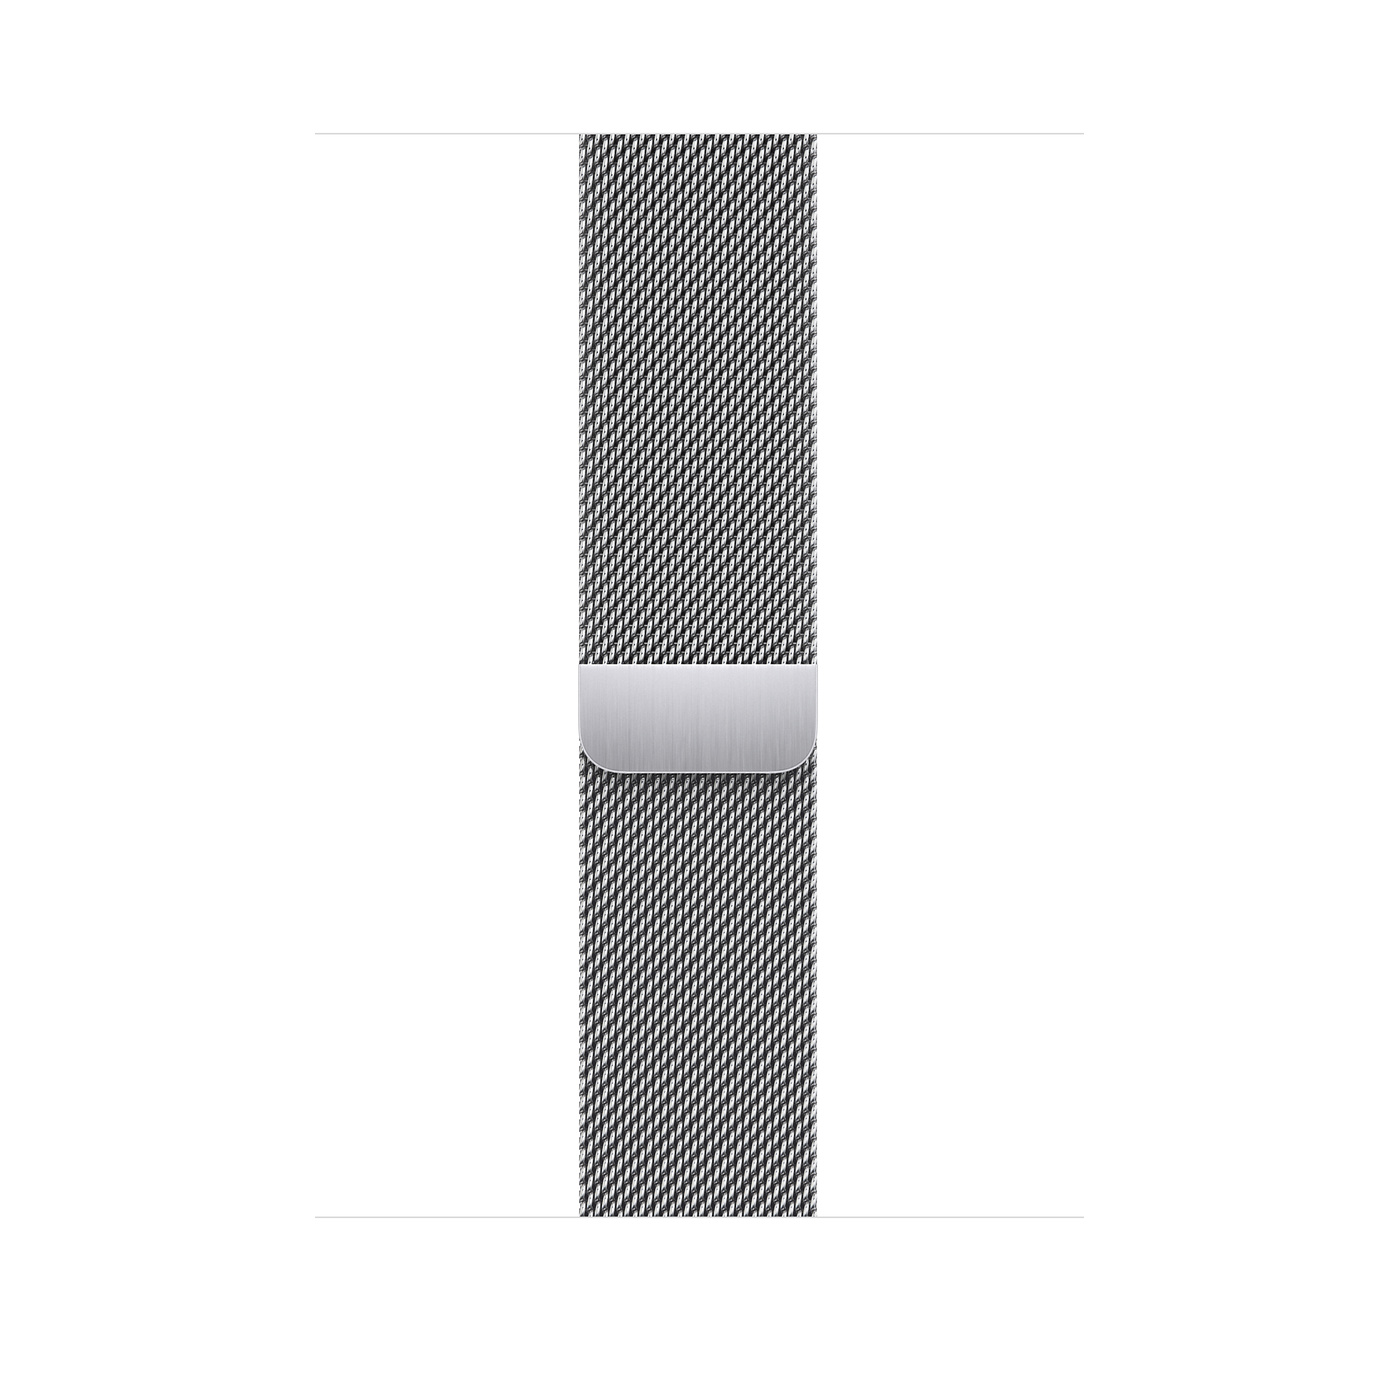 Apple Watch Series 8 (GPS+Cellular) 45mm Stainless Steel with Milanese Loop